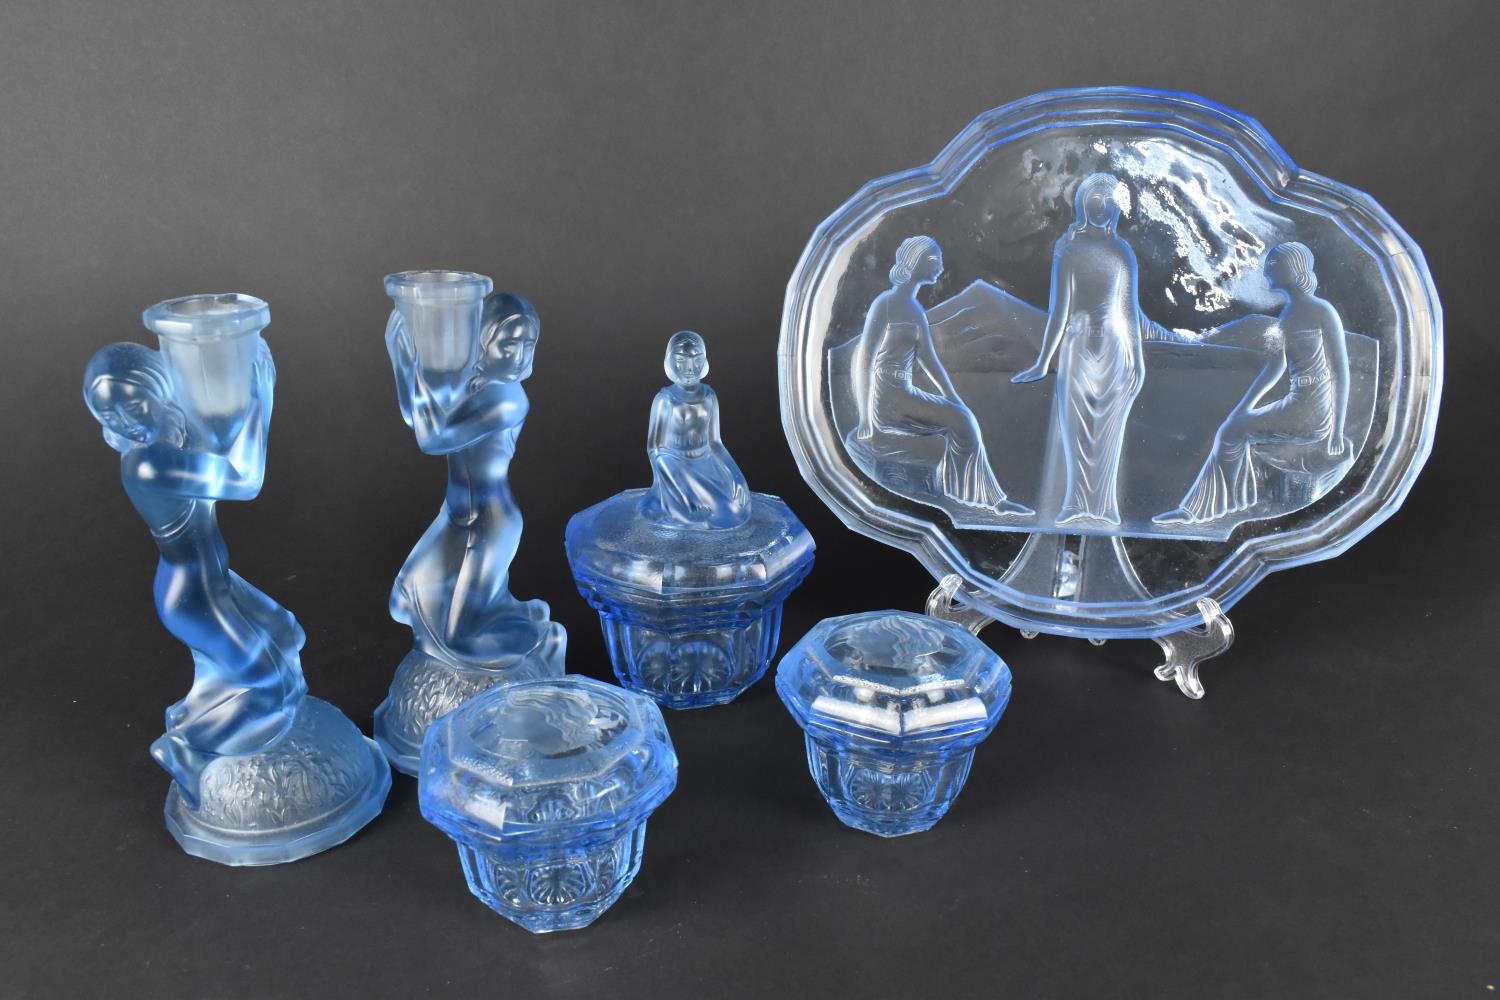 An Art Deco Frosted Blue Glass "Nymphen" Dressing Table Set in the Manner of Walther & Sohne to